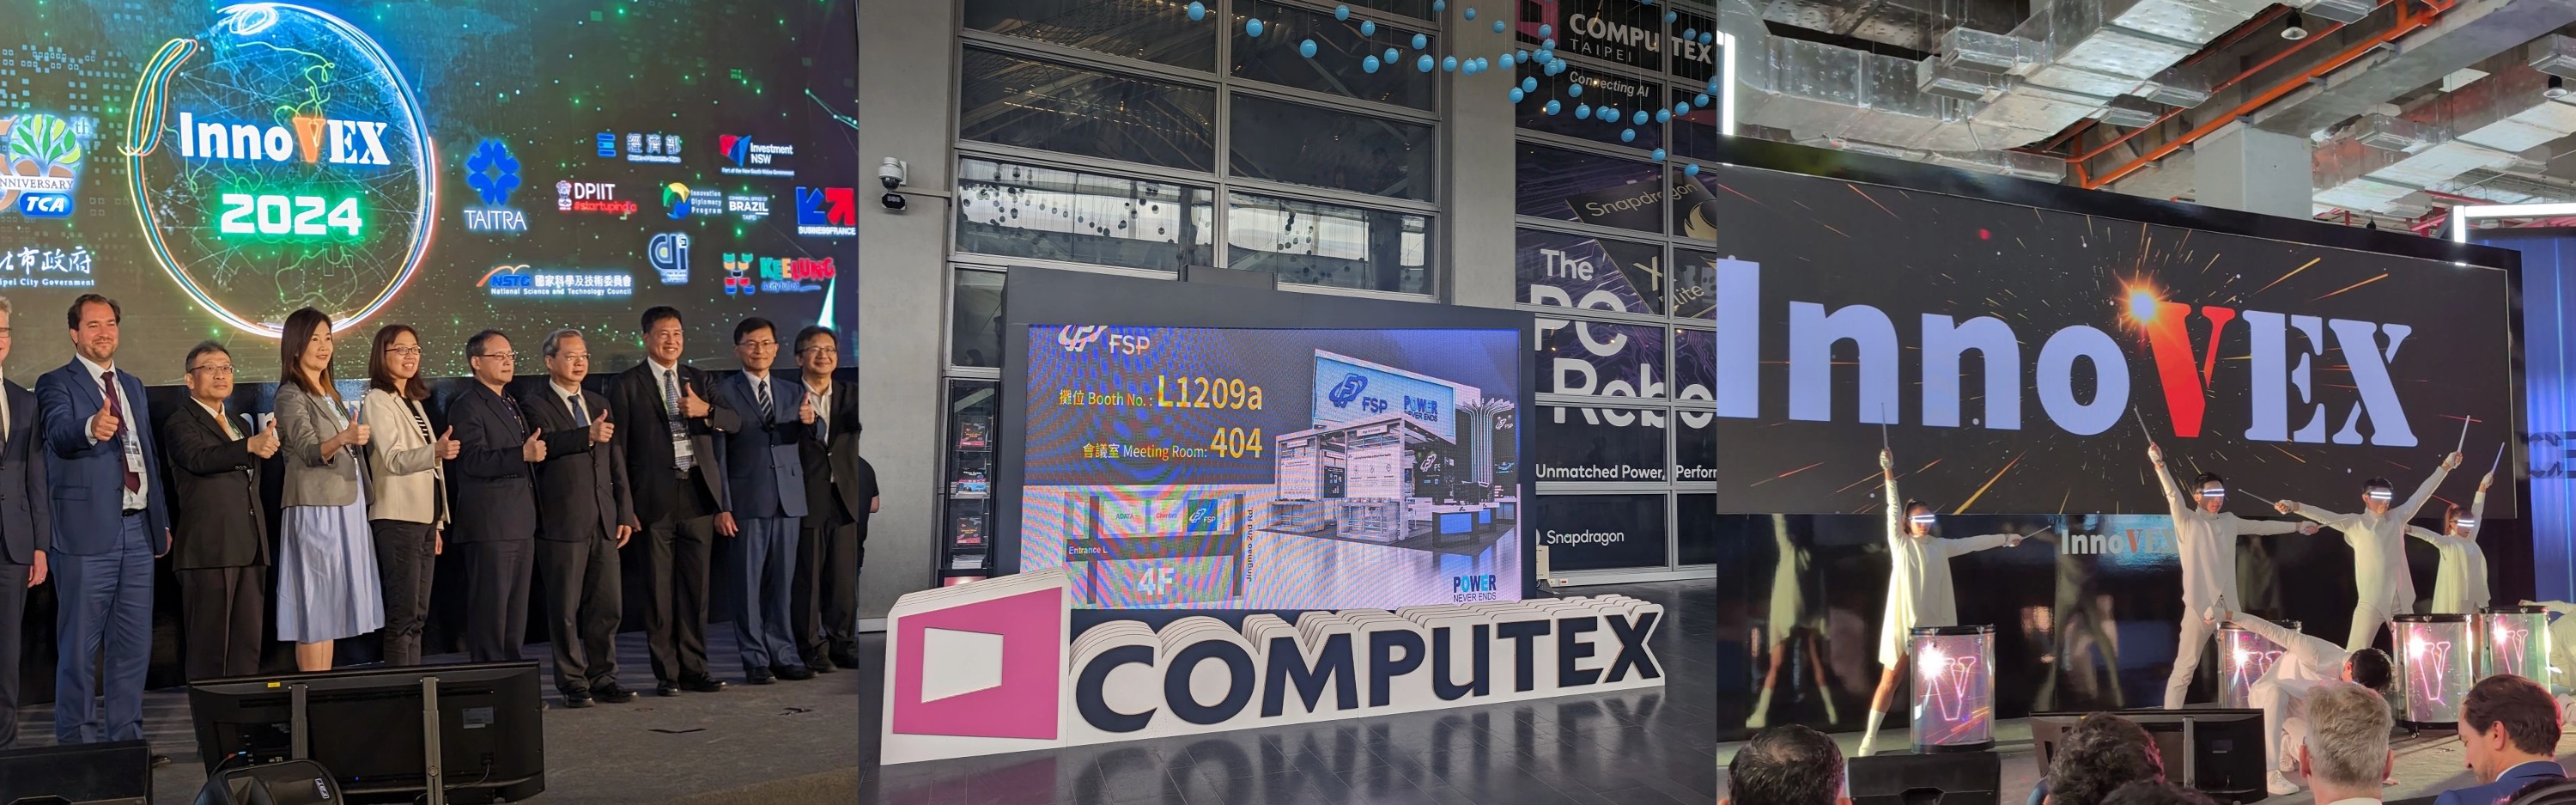 COMPUTEX 2024 underlines Taiwan's position as global tech leader